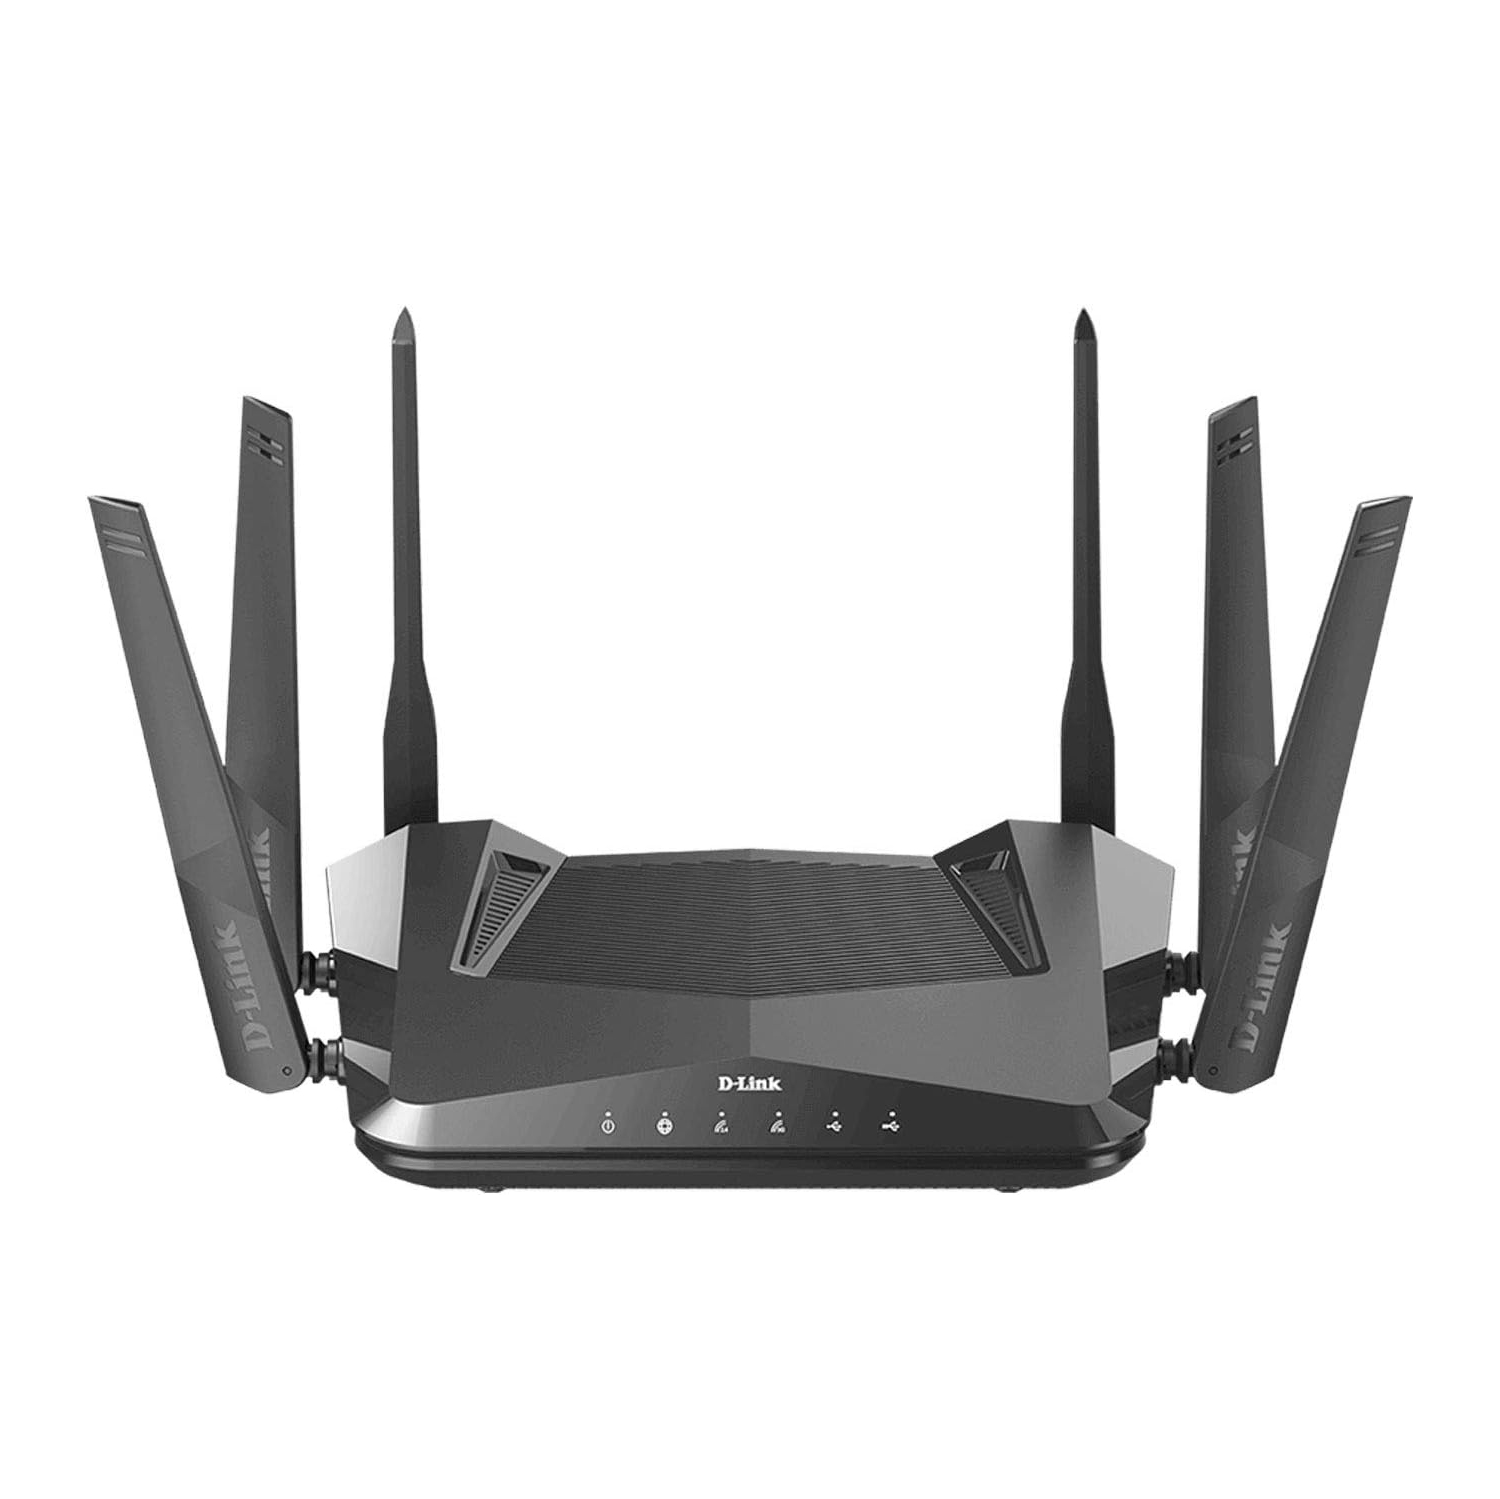 D-Link AX4800 Mesh Wi-Fi 6 Router - 6-Stream, 802.11ax Router, Gigabit, Dual Band, OFDMA, MU-MIMO, WiFi 6, Voice Control with Google Assistant and Amazon Alexa, WiFi